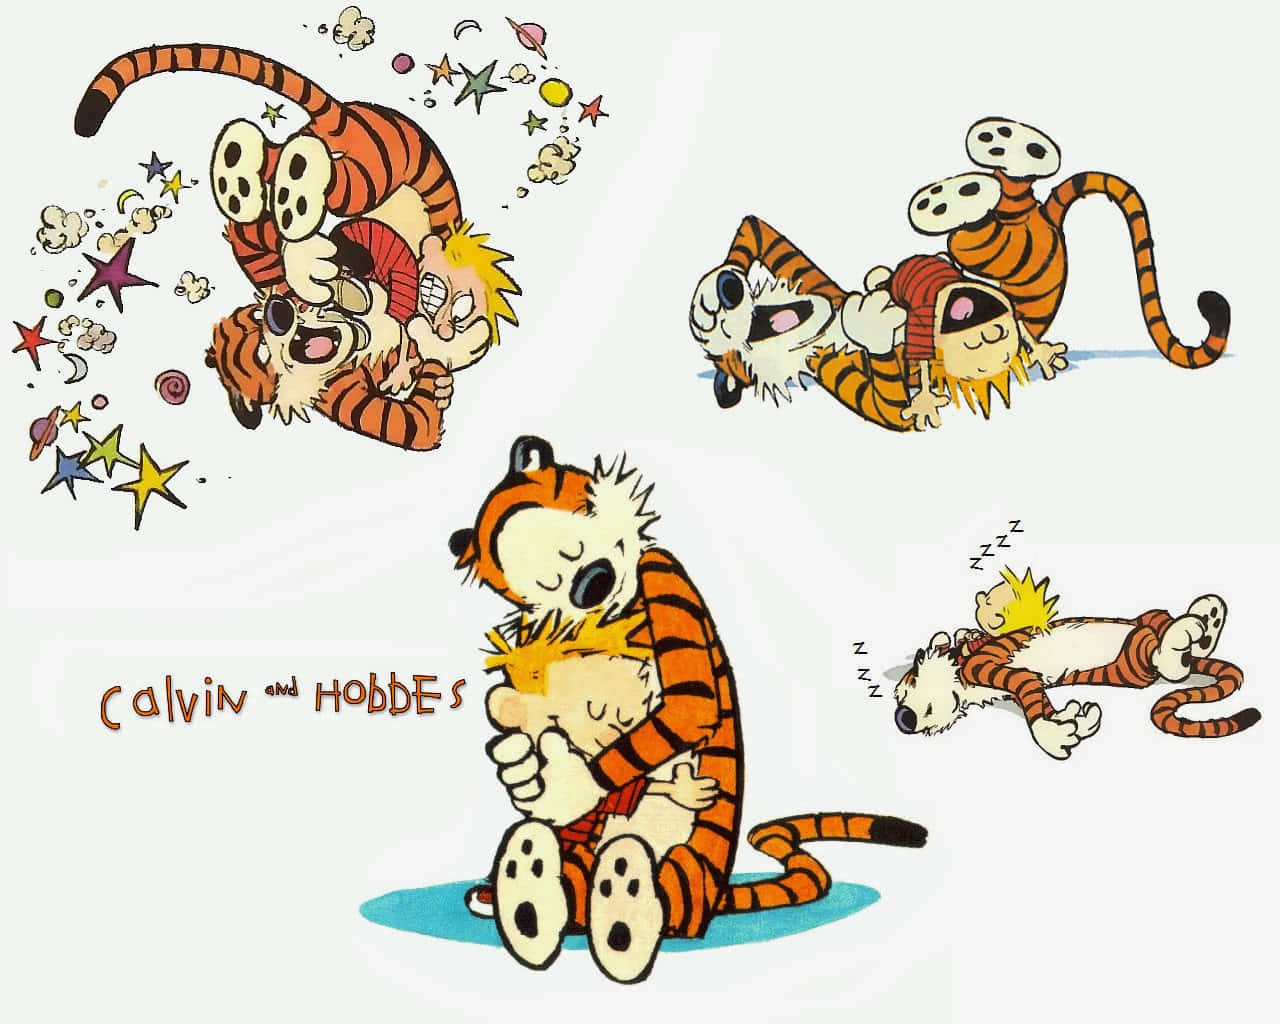 Best Friends Calvin And Hobbes  Picture